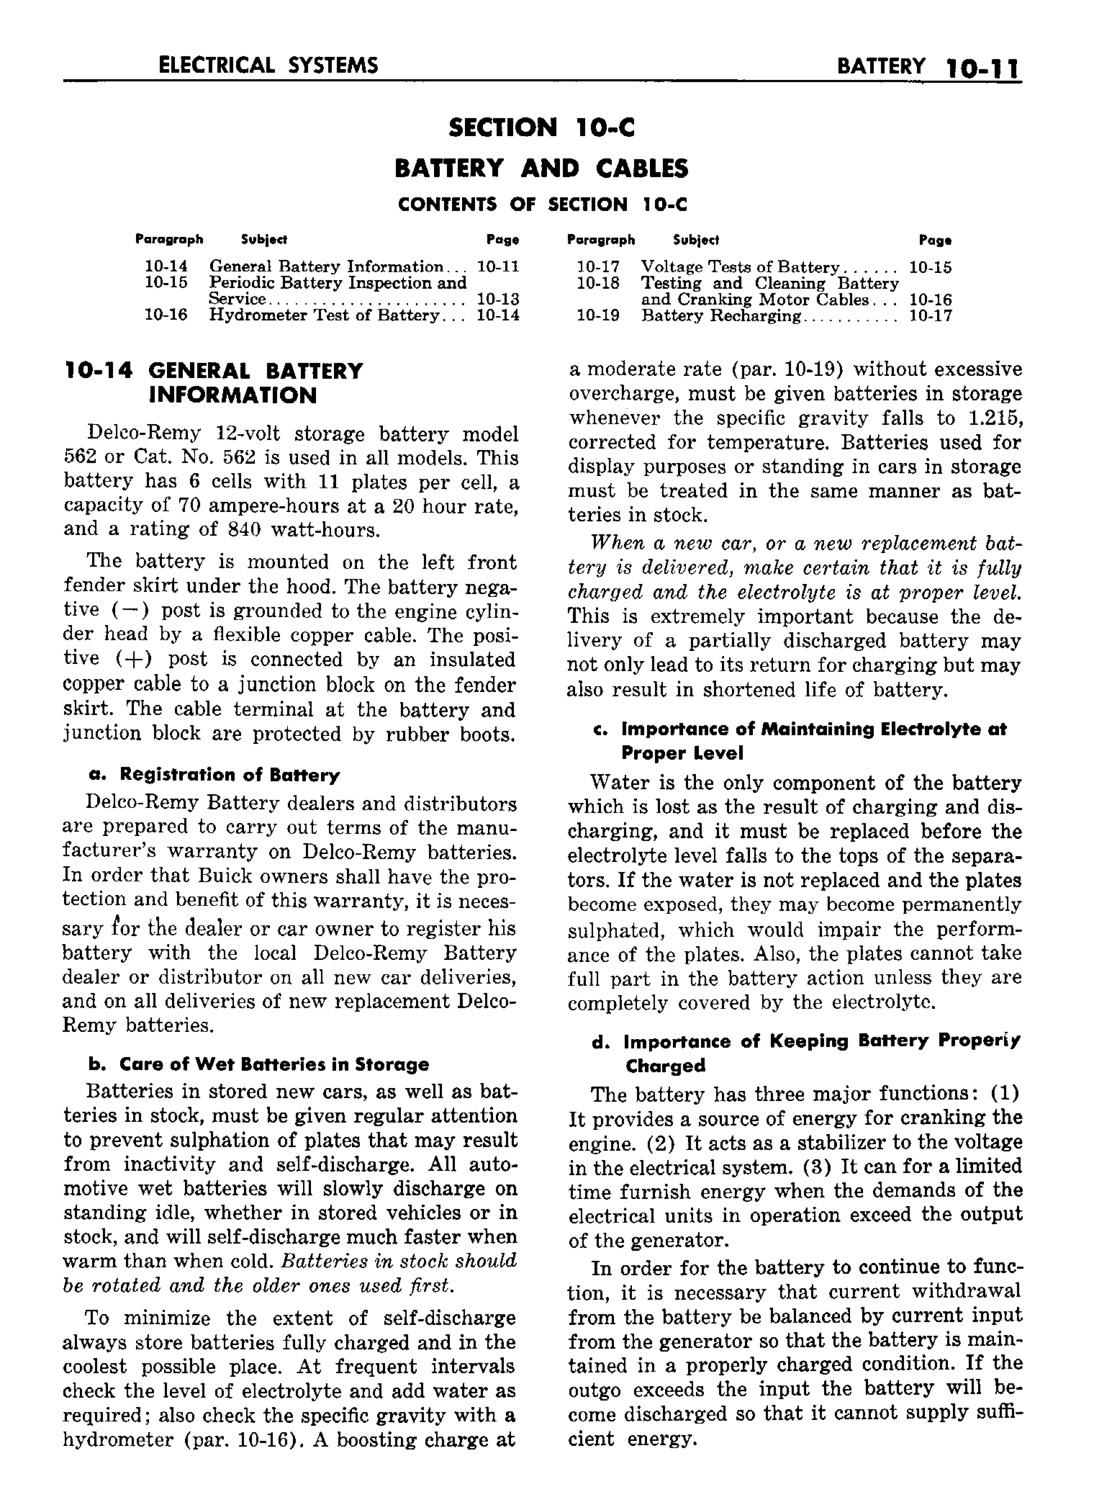 n_11 1960 Buick Shop Manual - Electrical Systems-011-011.jpg